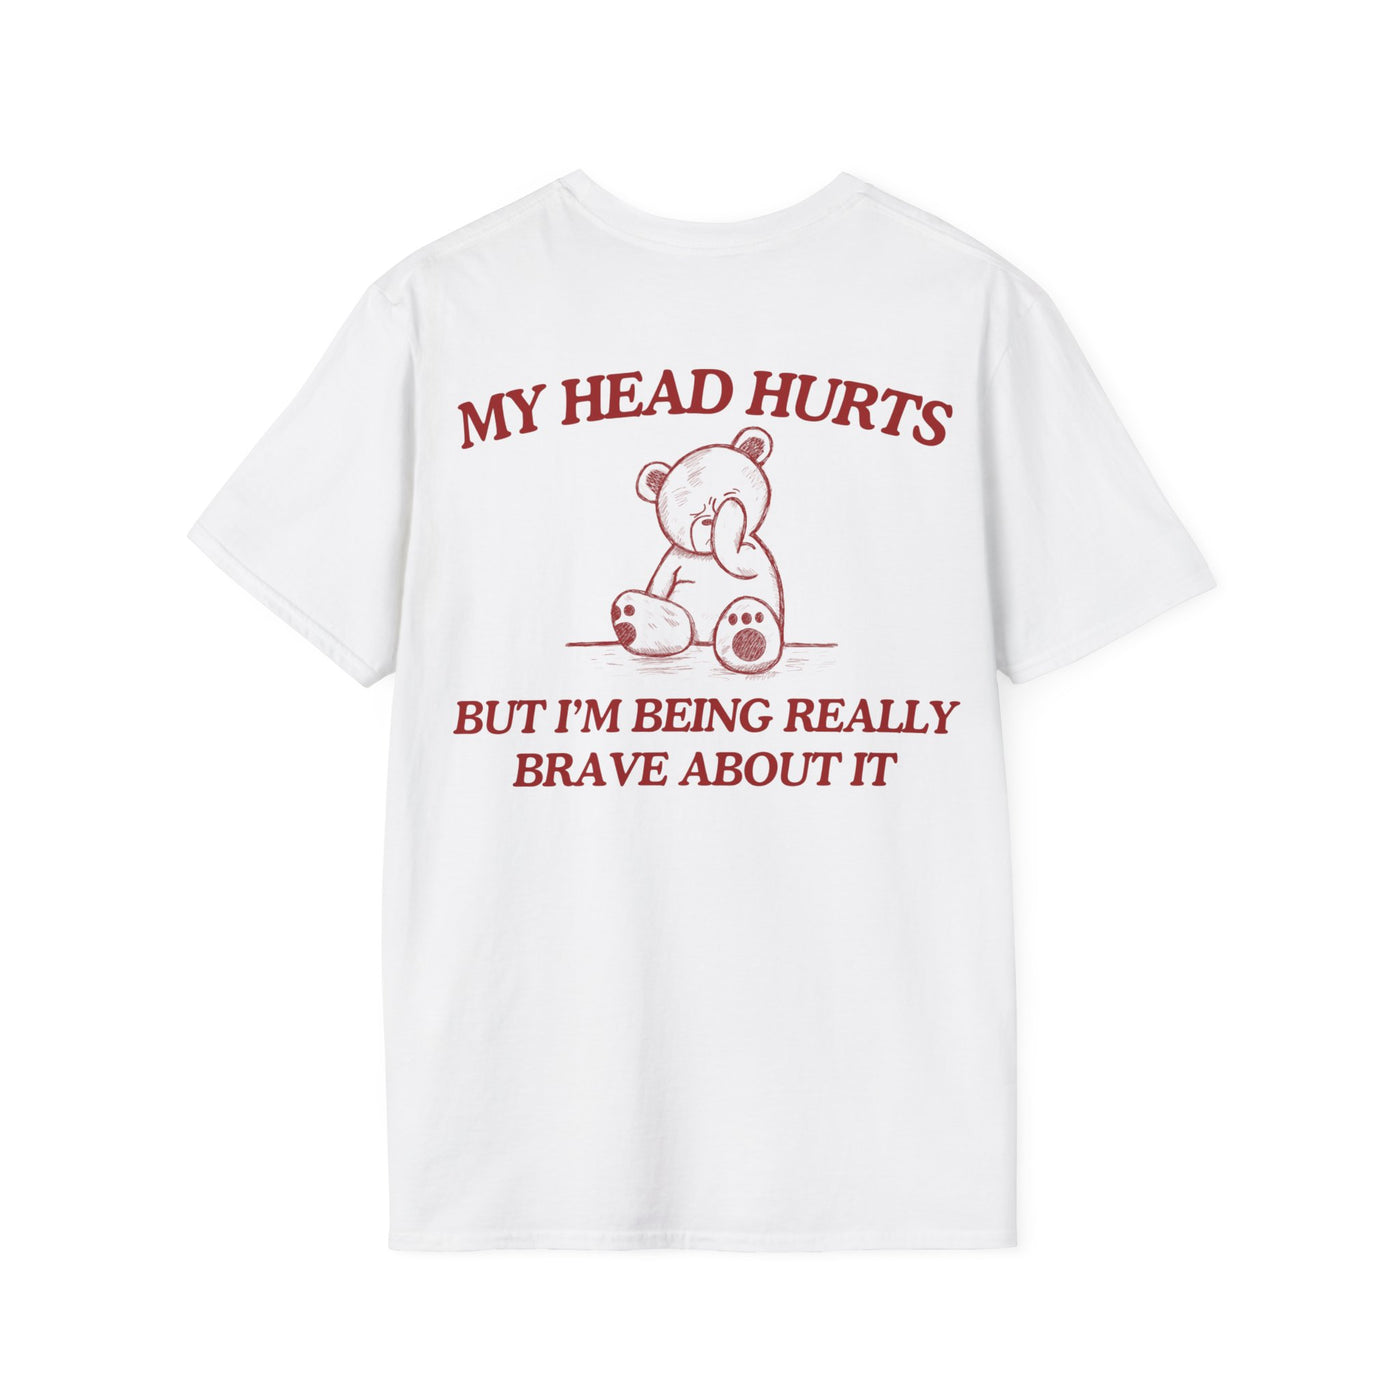 My Head Hurts (BACK DESIGN ONLY)